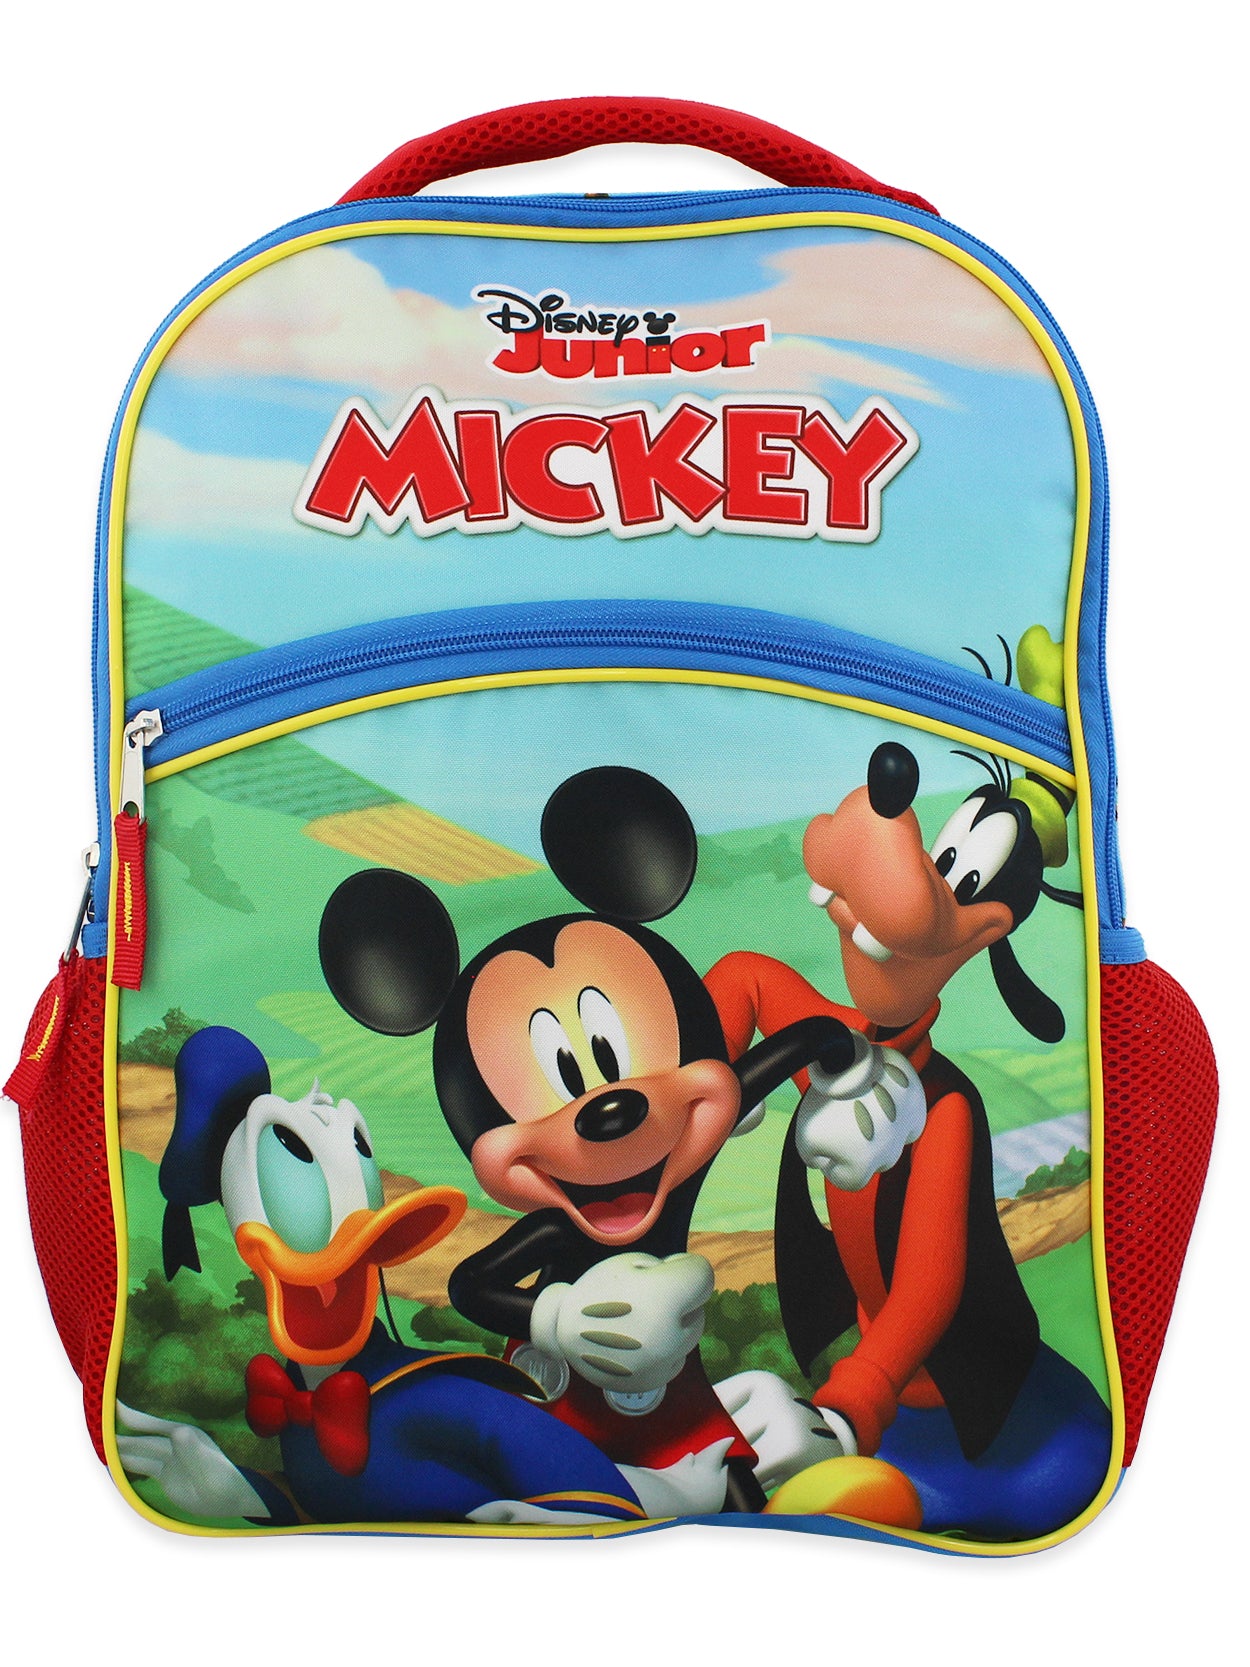 Disney Mickey Square Shaped Hard Shell Bag Blue 10.4 Inches Online in  India, Buy at Best Price from Firstcry.com - 14698704